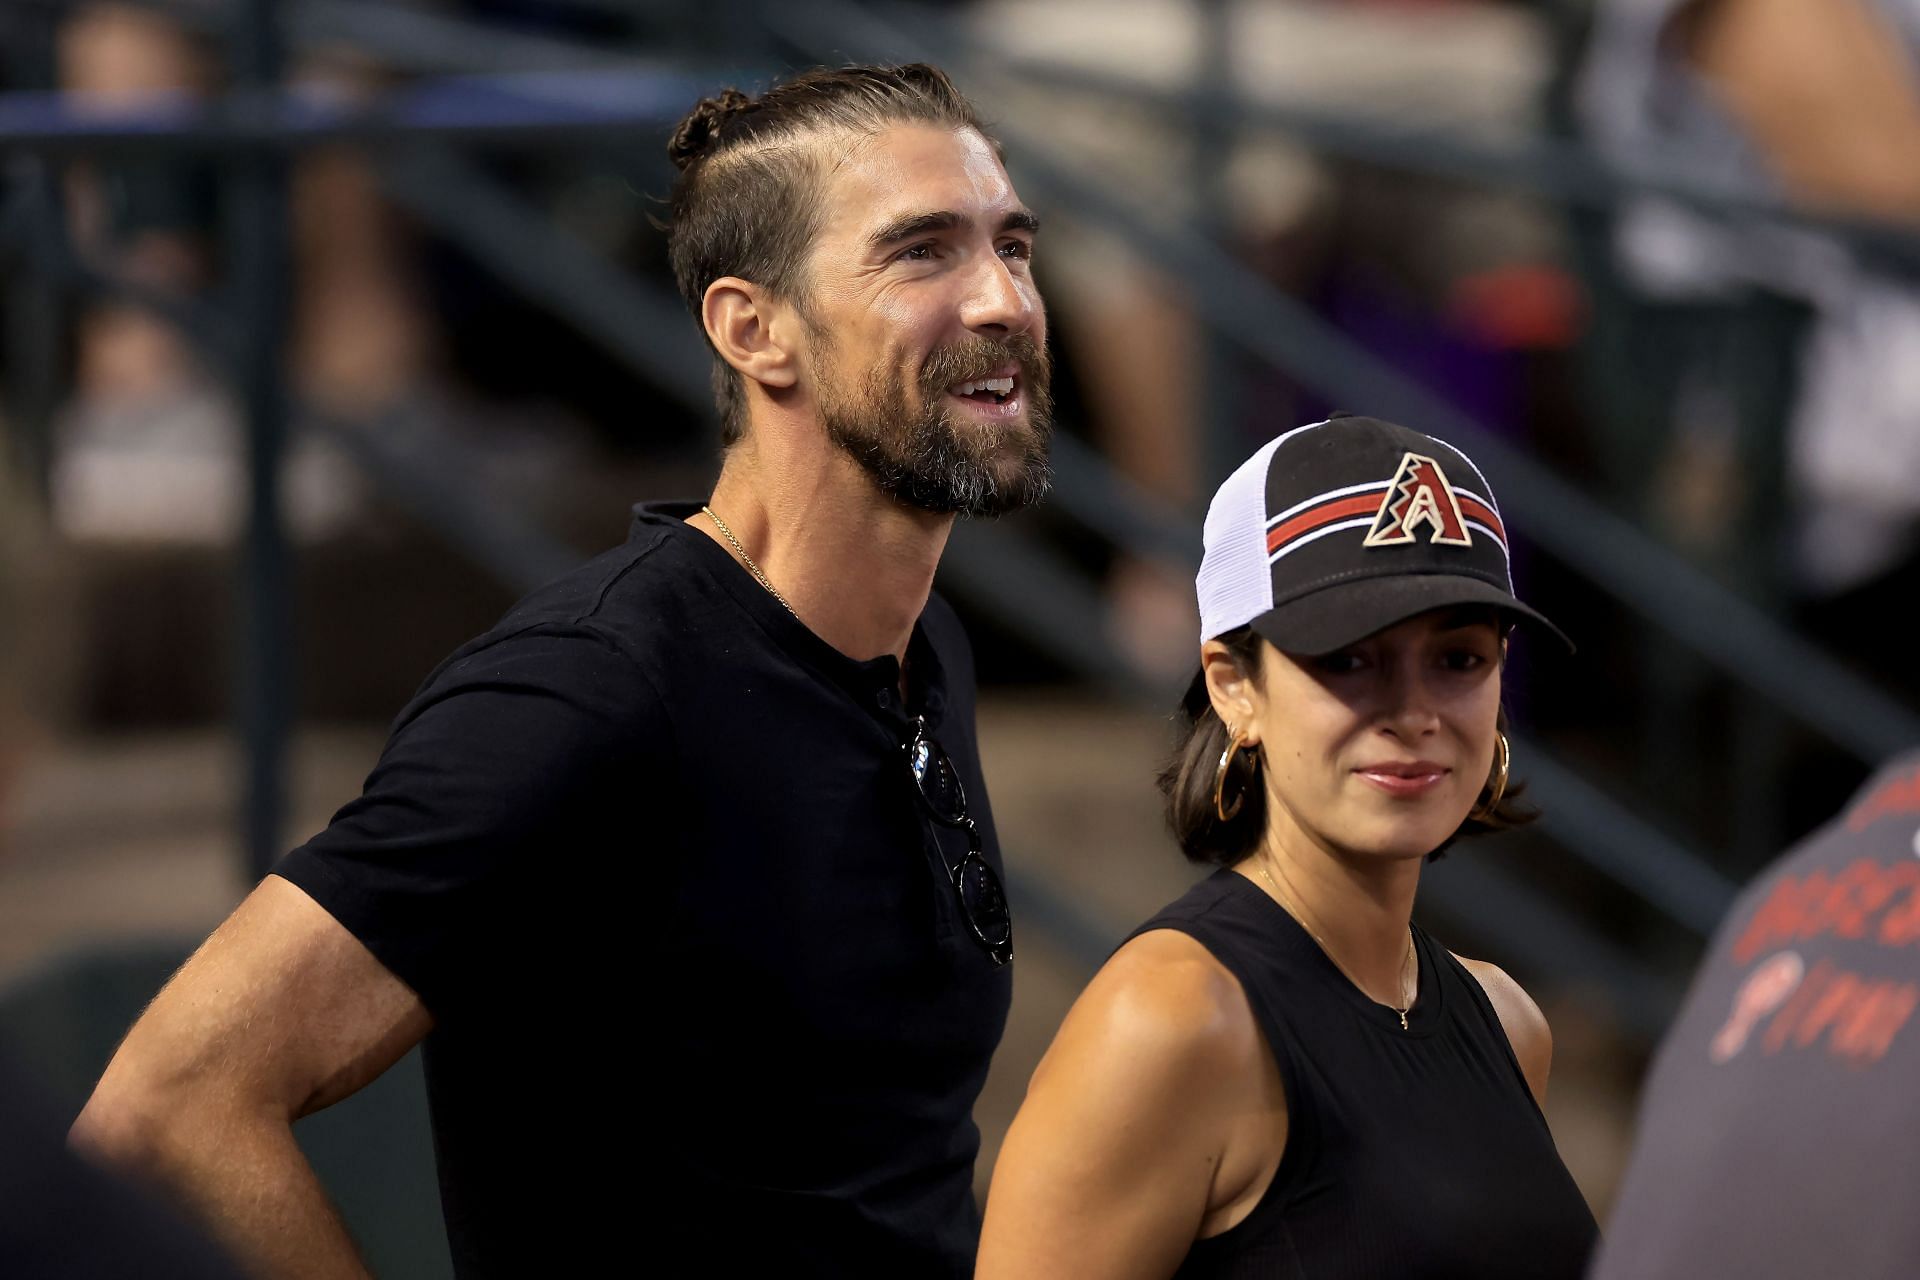 Michael Phelps is seen before Game Four of the National League Championship Series between the Arizona Diamondbacks and the Philadelphia Phillies at Chase Field in Phoenix, Arizona.